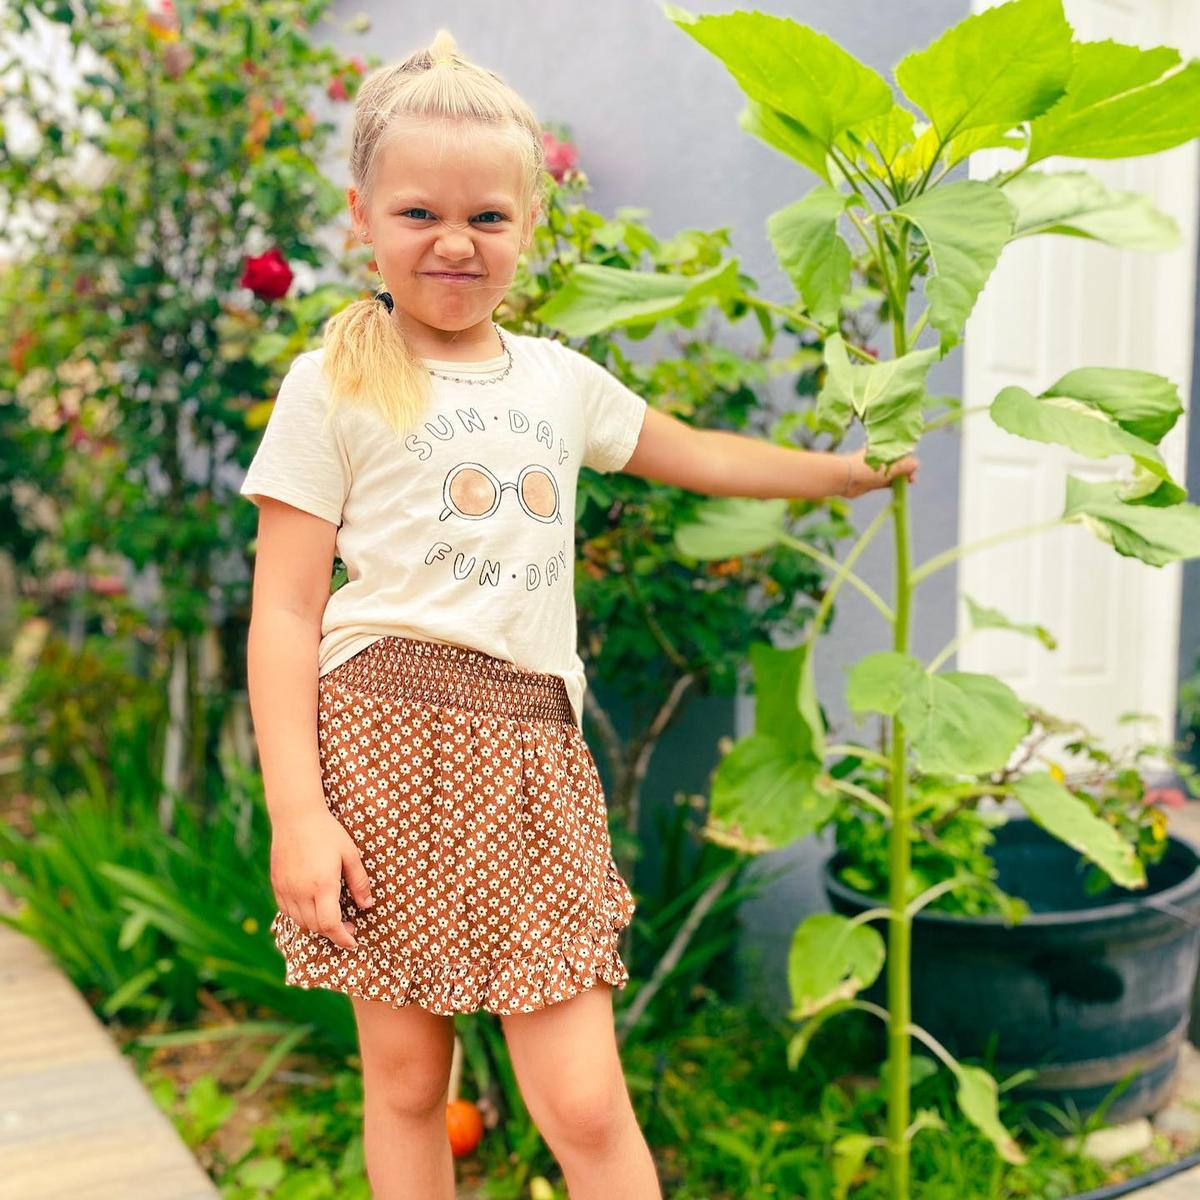 Evelyn in the garden, where she spent much of her time during COVID-19 lockdowns. (Courtesy of <a href="https://www.instagram.com/mykidsaredirtyagain/">Taylor Raine</a>)